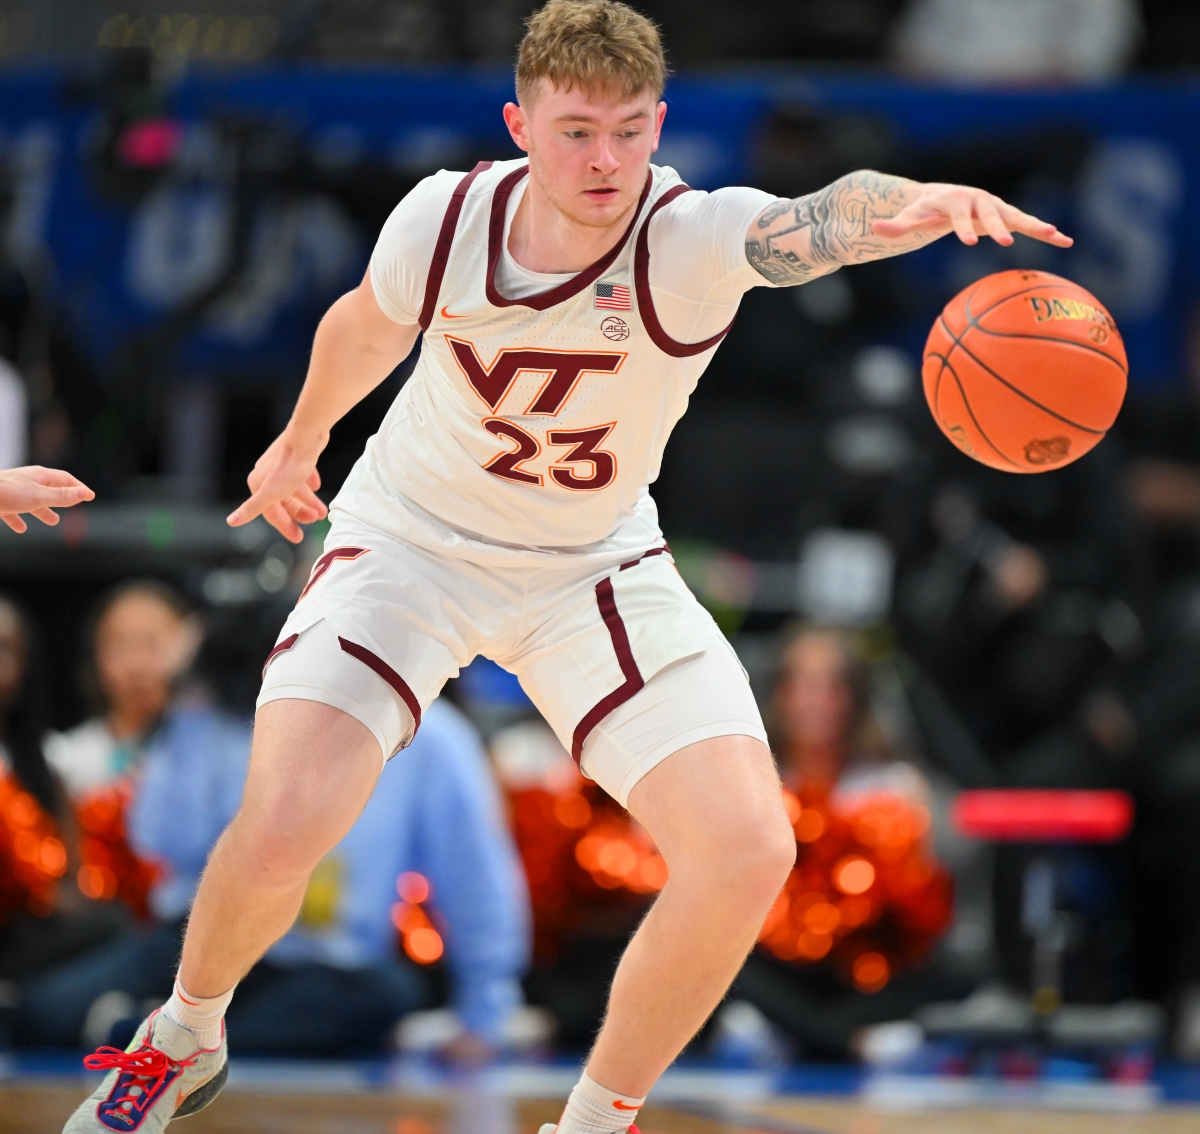 Tyler Nickel has big game for Virginia Tech, but frustrated he isn’t playing UNC again